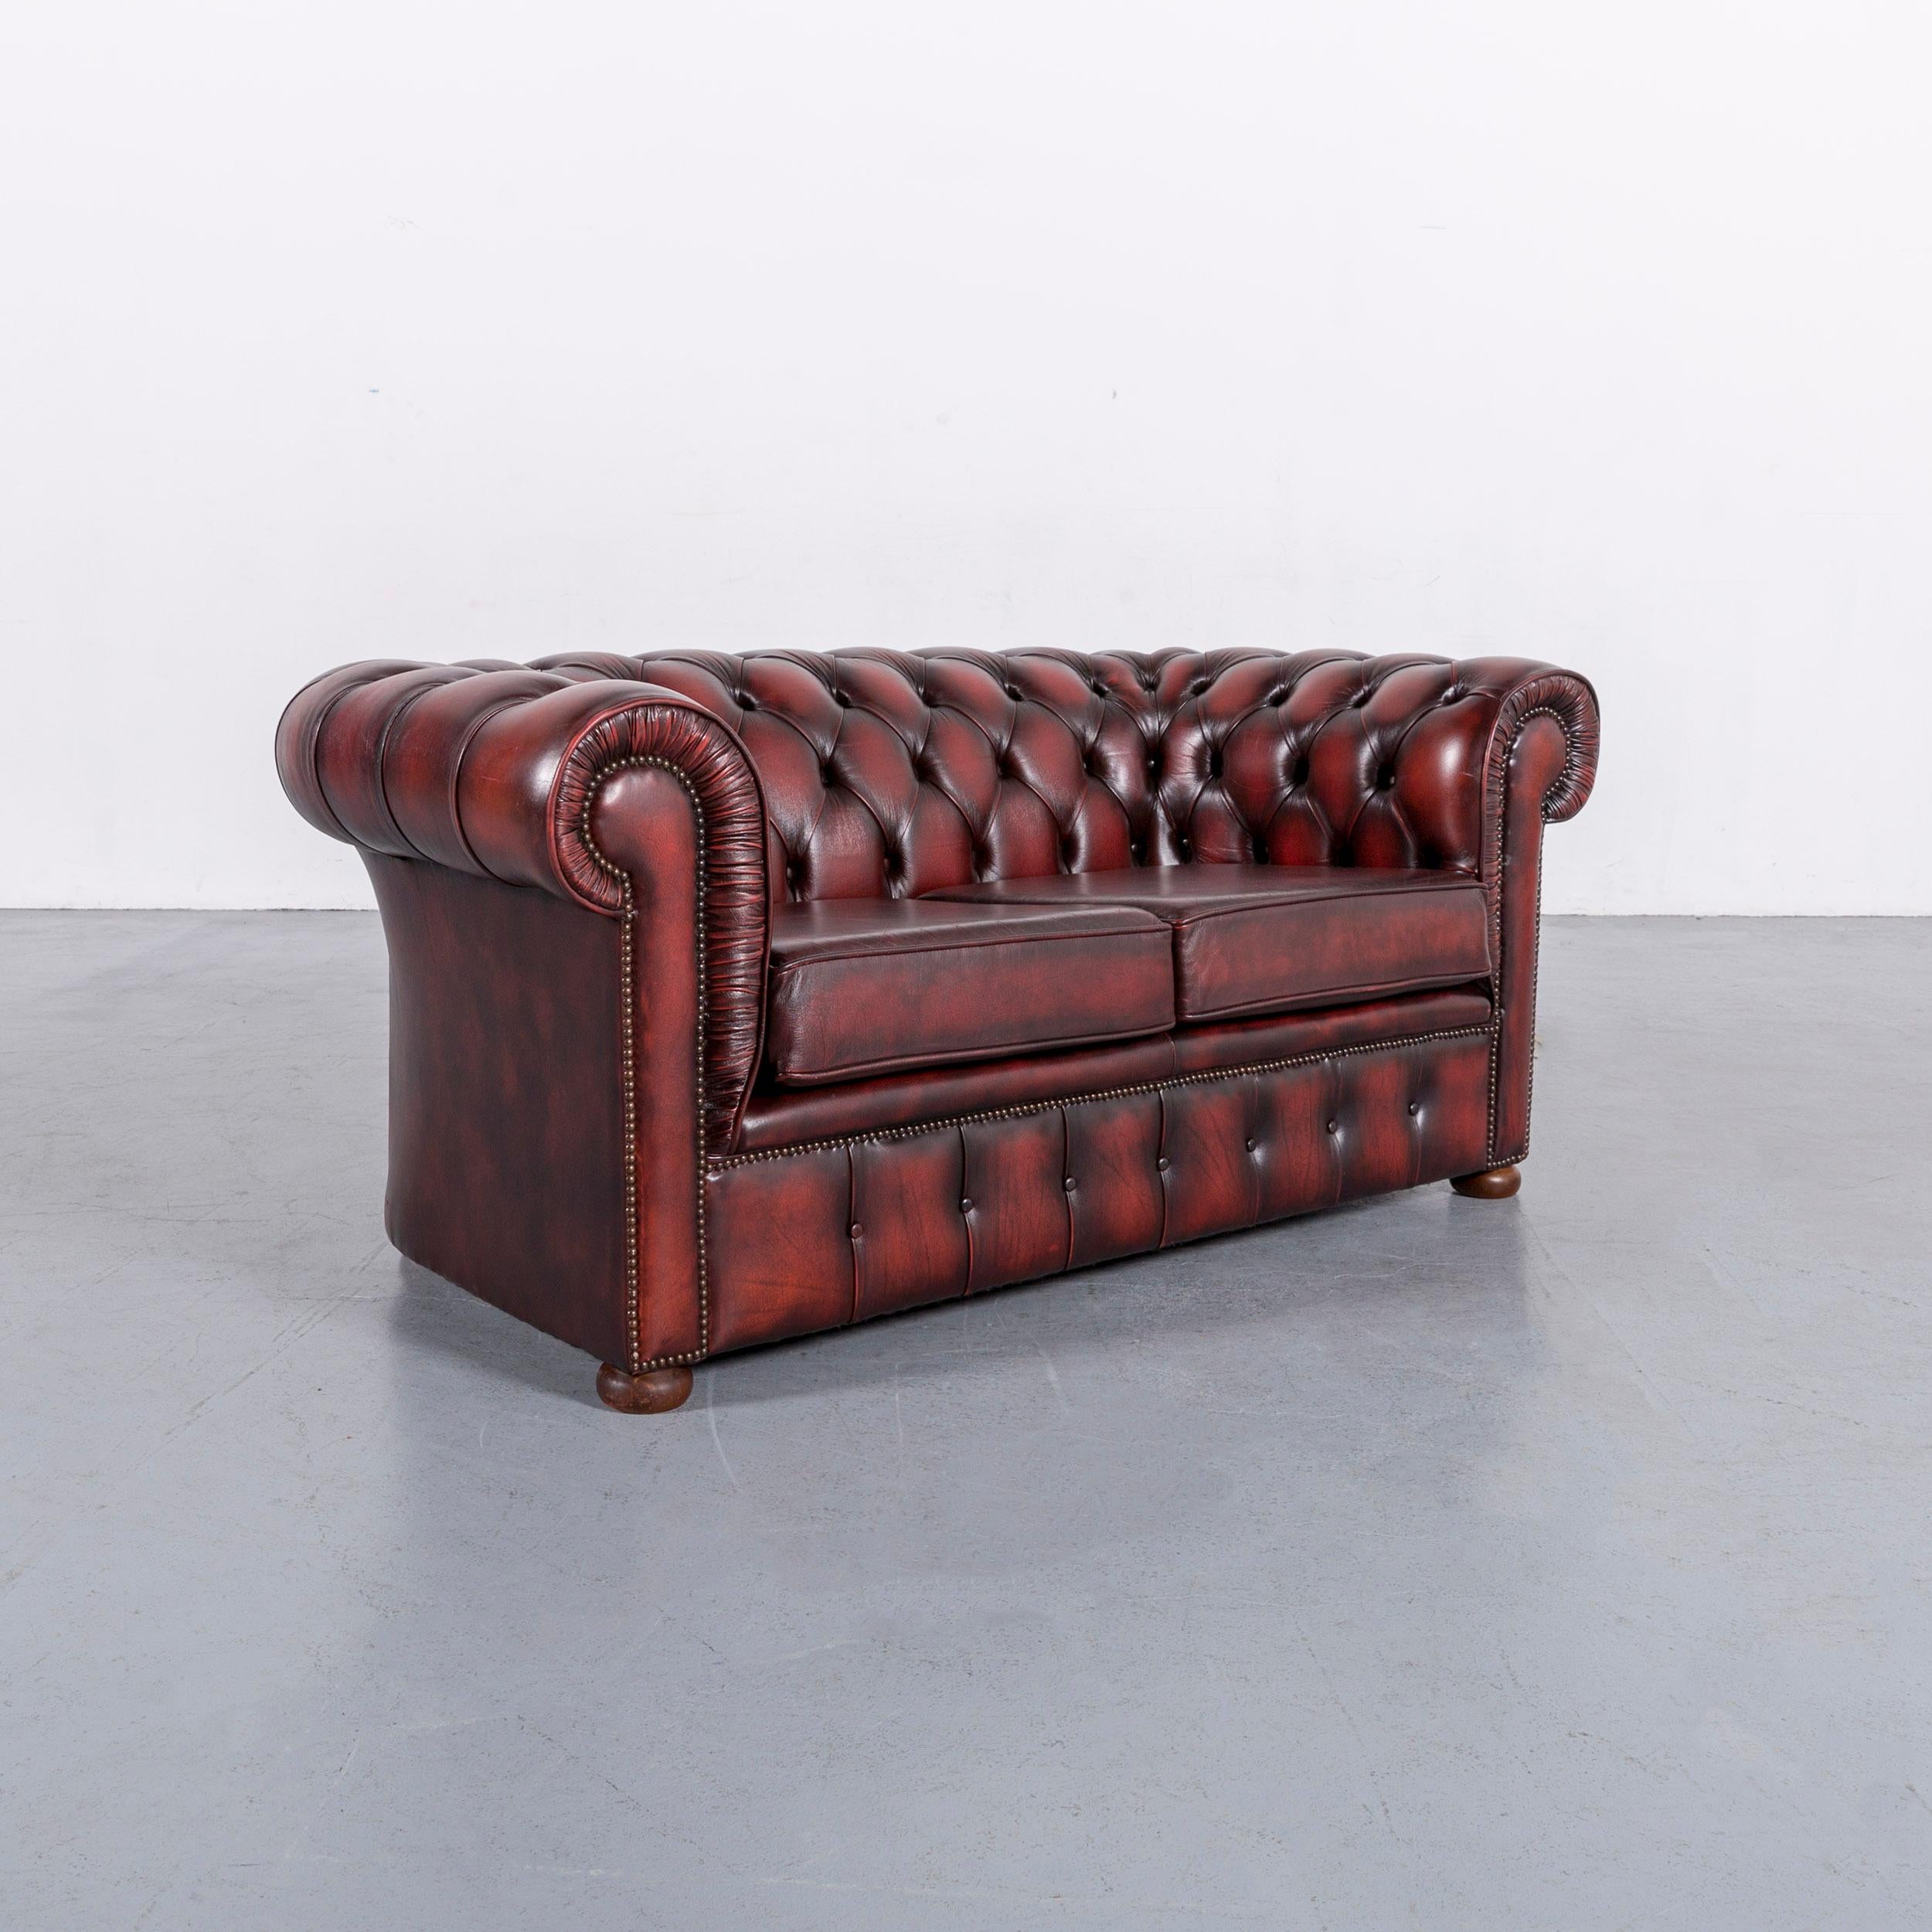 Chesterfield Leather Sofa Red Two-Seat Vintage Retro 1